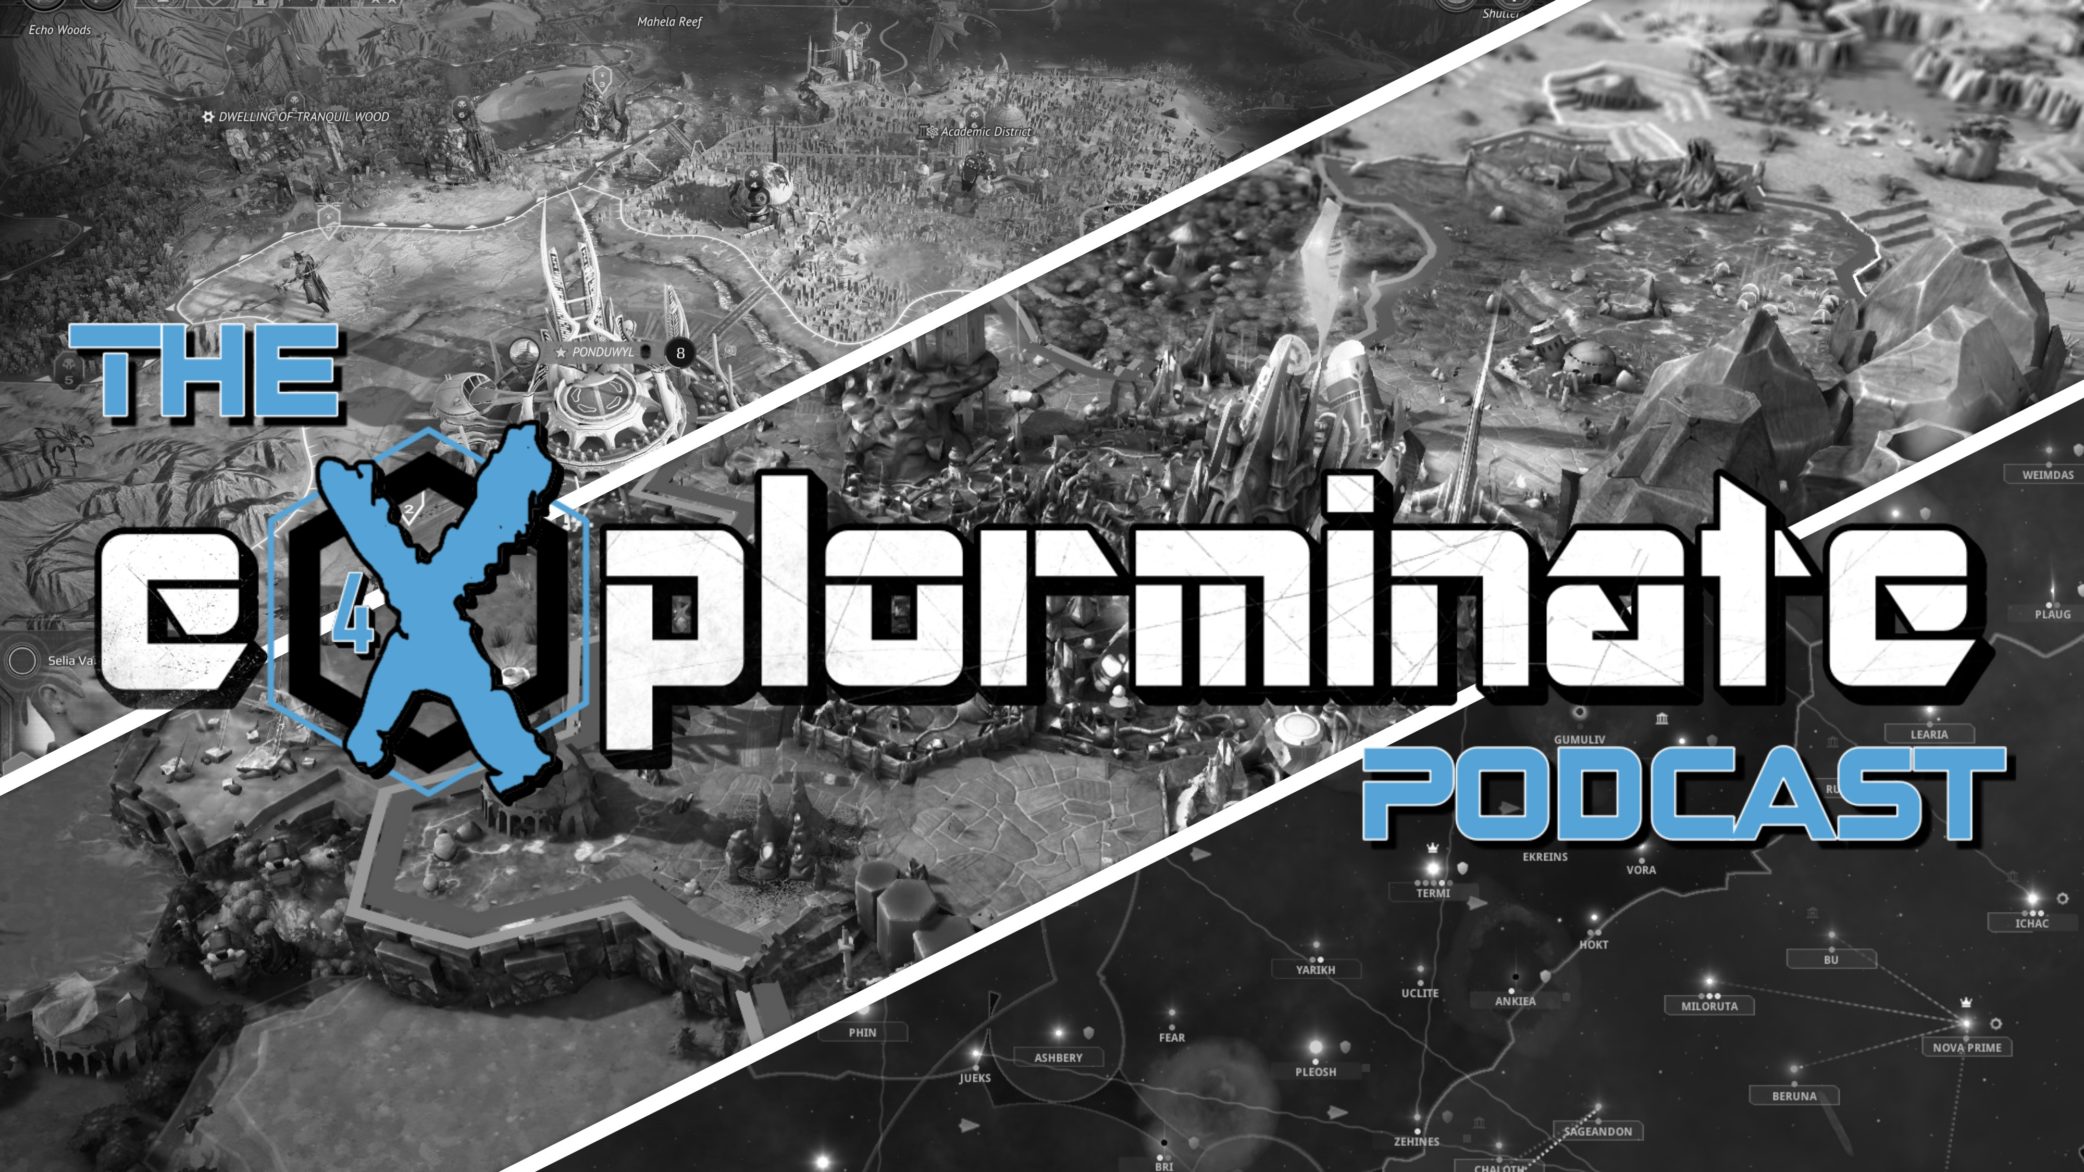 Podcast Episode #23: Huge News and a Planetfall Postmortem